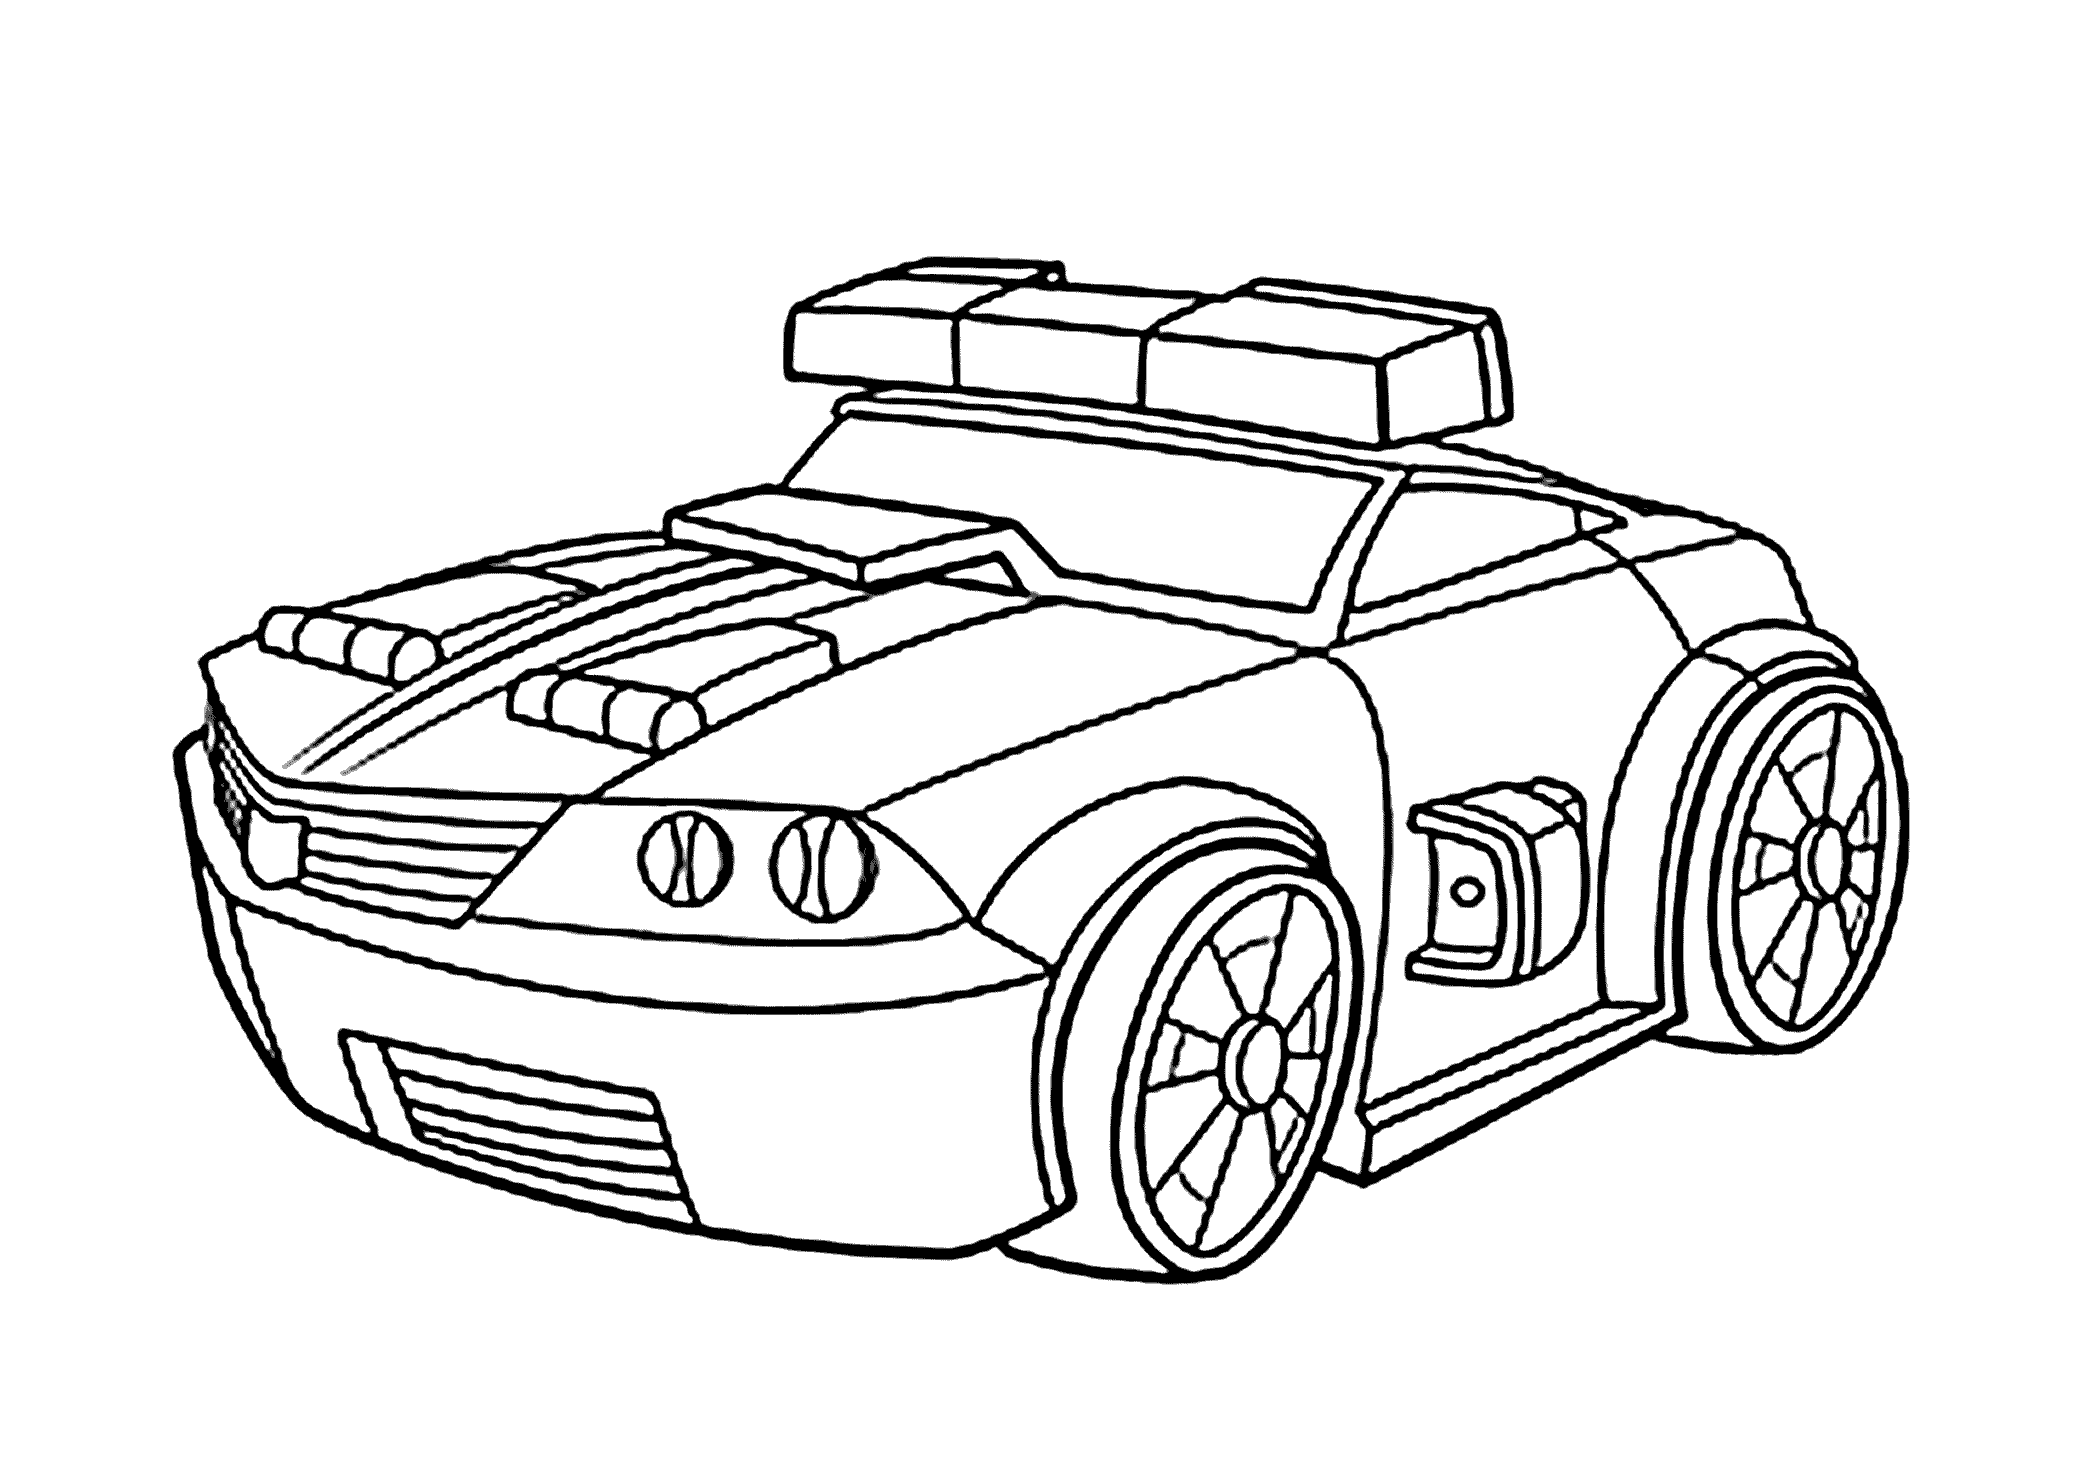 Chase Police Bot Coloring Pages For Kids Printable Free Rescue Bots Truck Coloring Pa